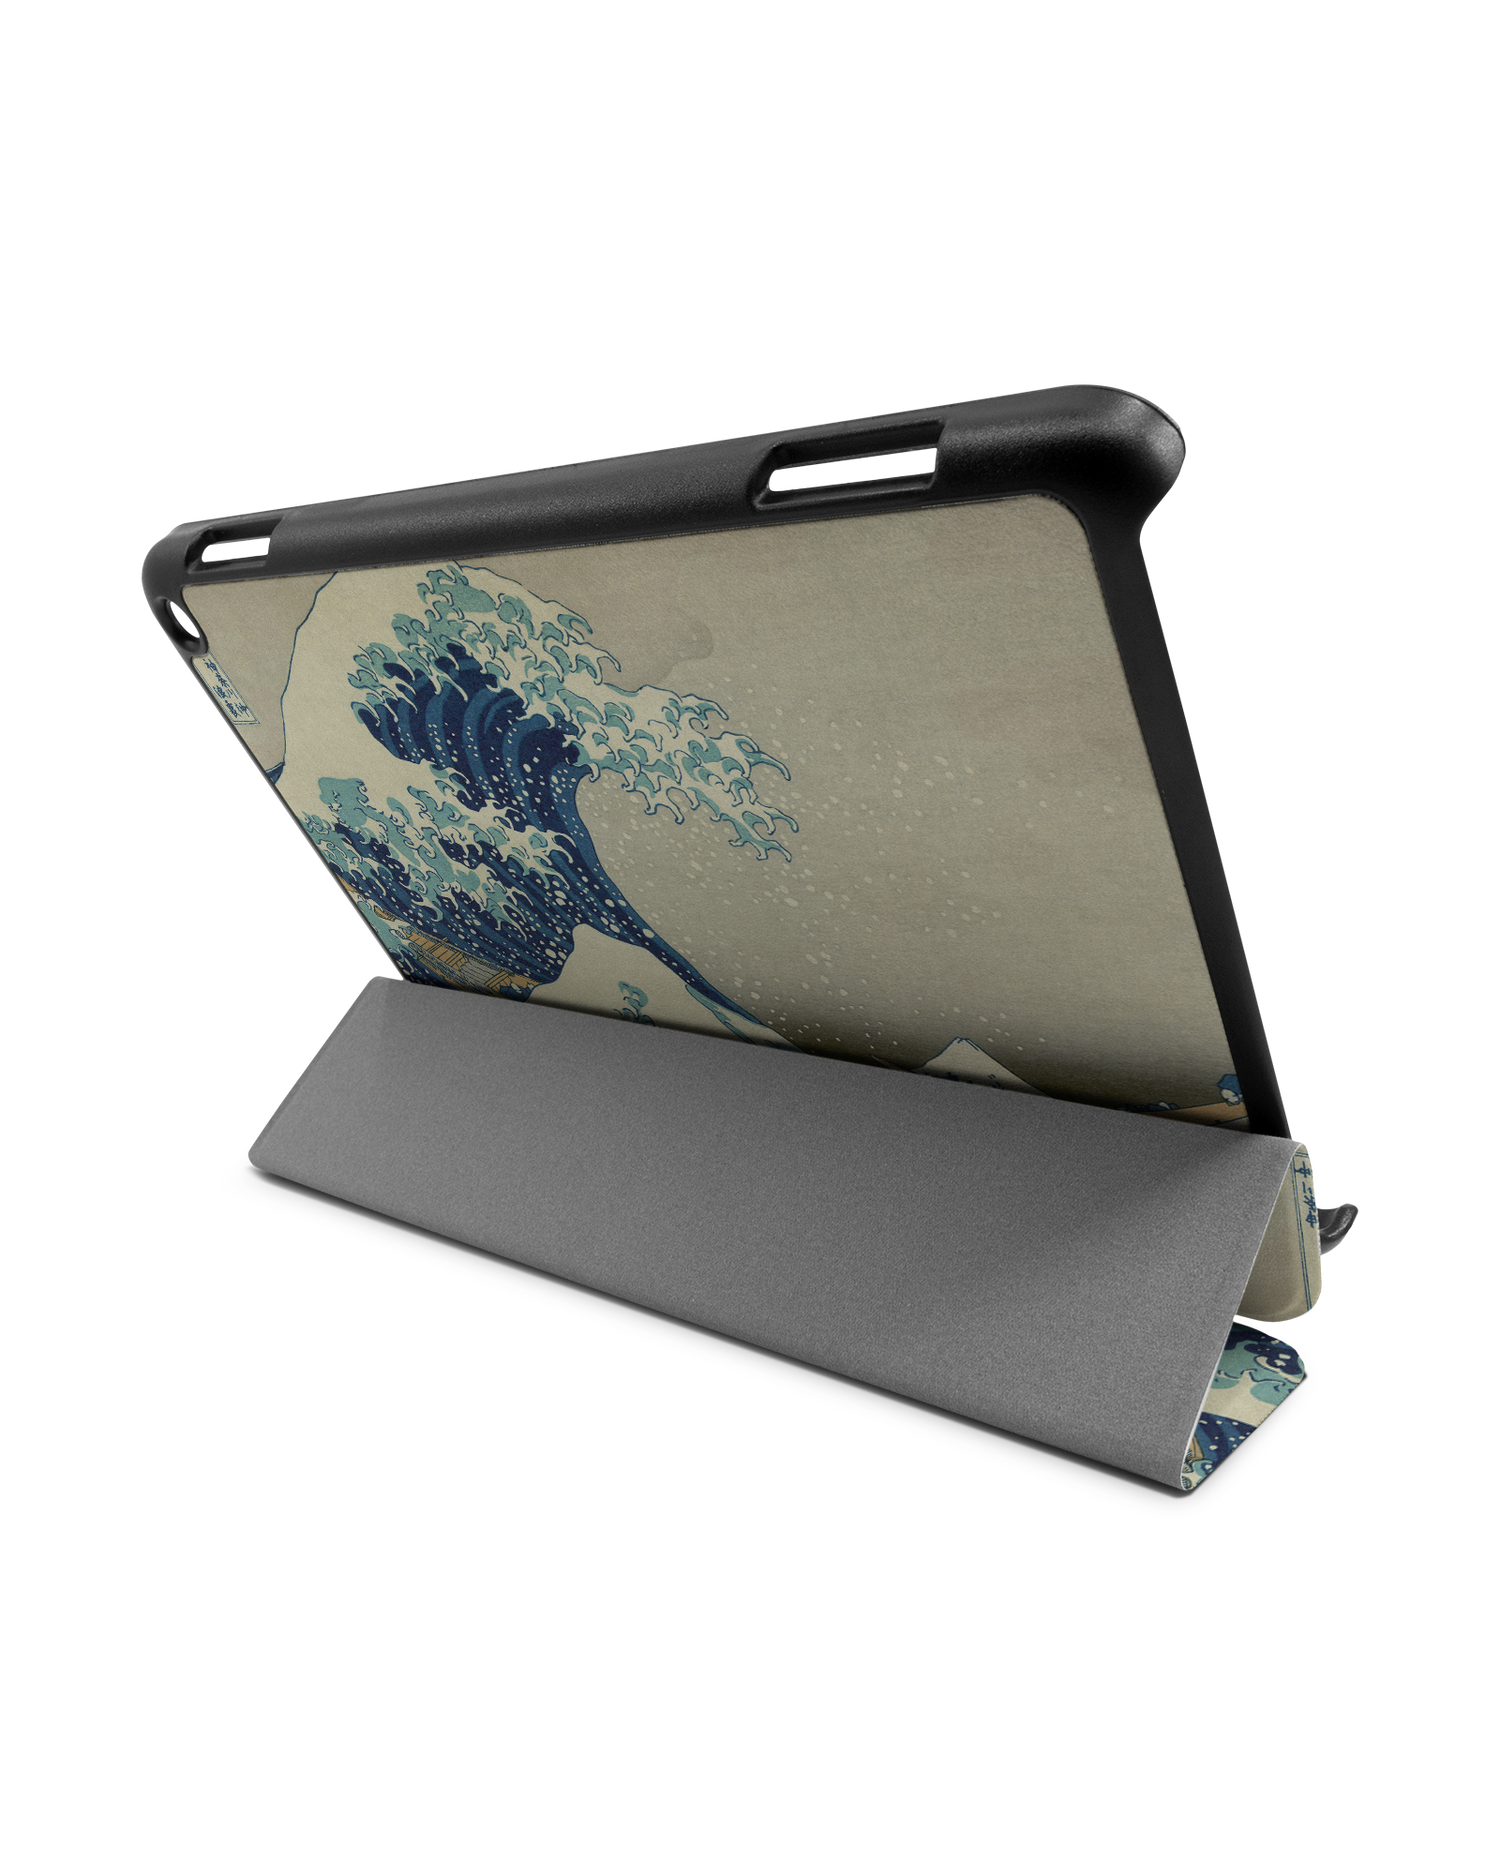 Great Wave Off Kanagawa By Hokusai Tablet Smart Case for Amazon Fire HD 8 (2022), Amazon Fire HD 8 Plus (2022), Amazon Fire HD 8 (2020), Amazon Fire HD 8 Plus (2020): Used as Stand